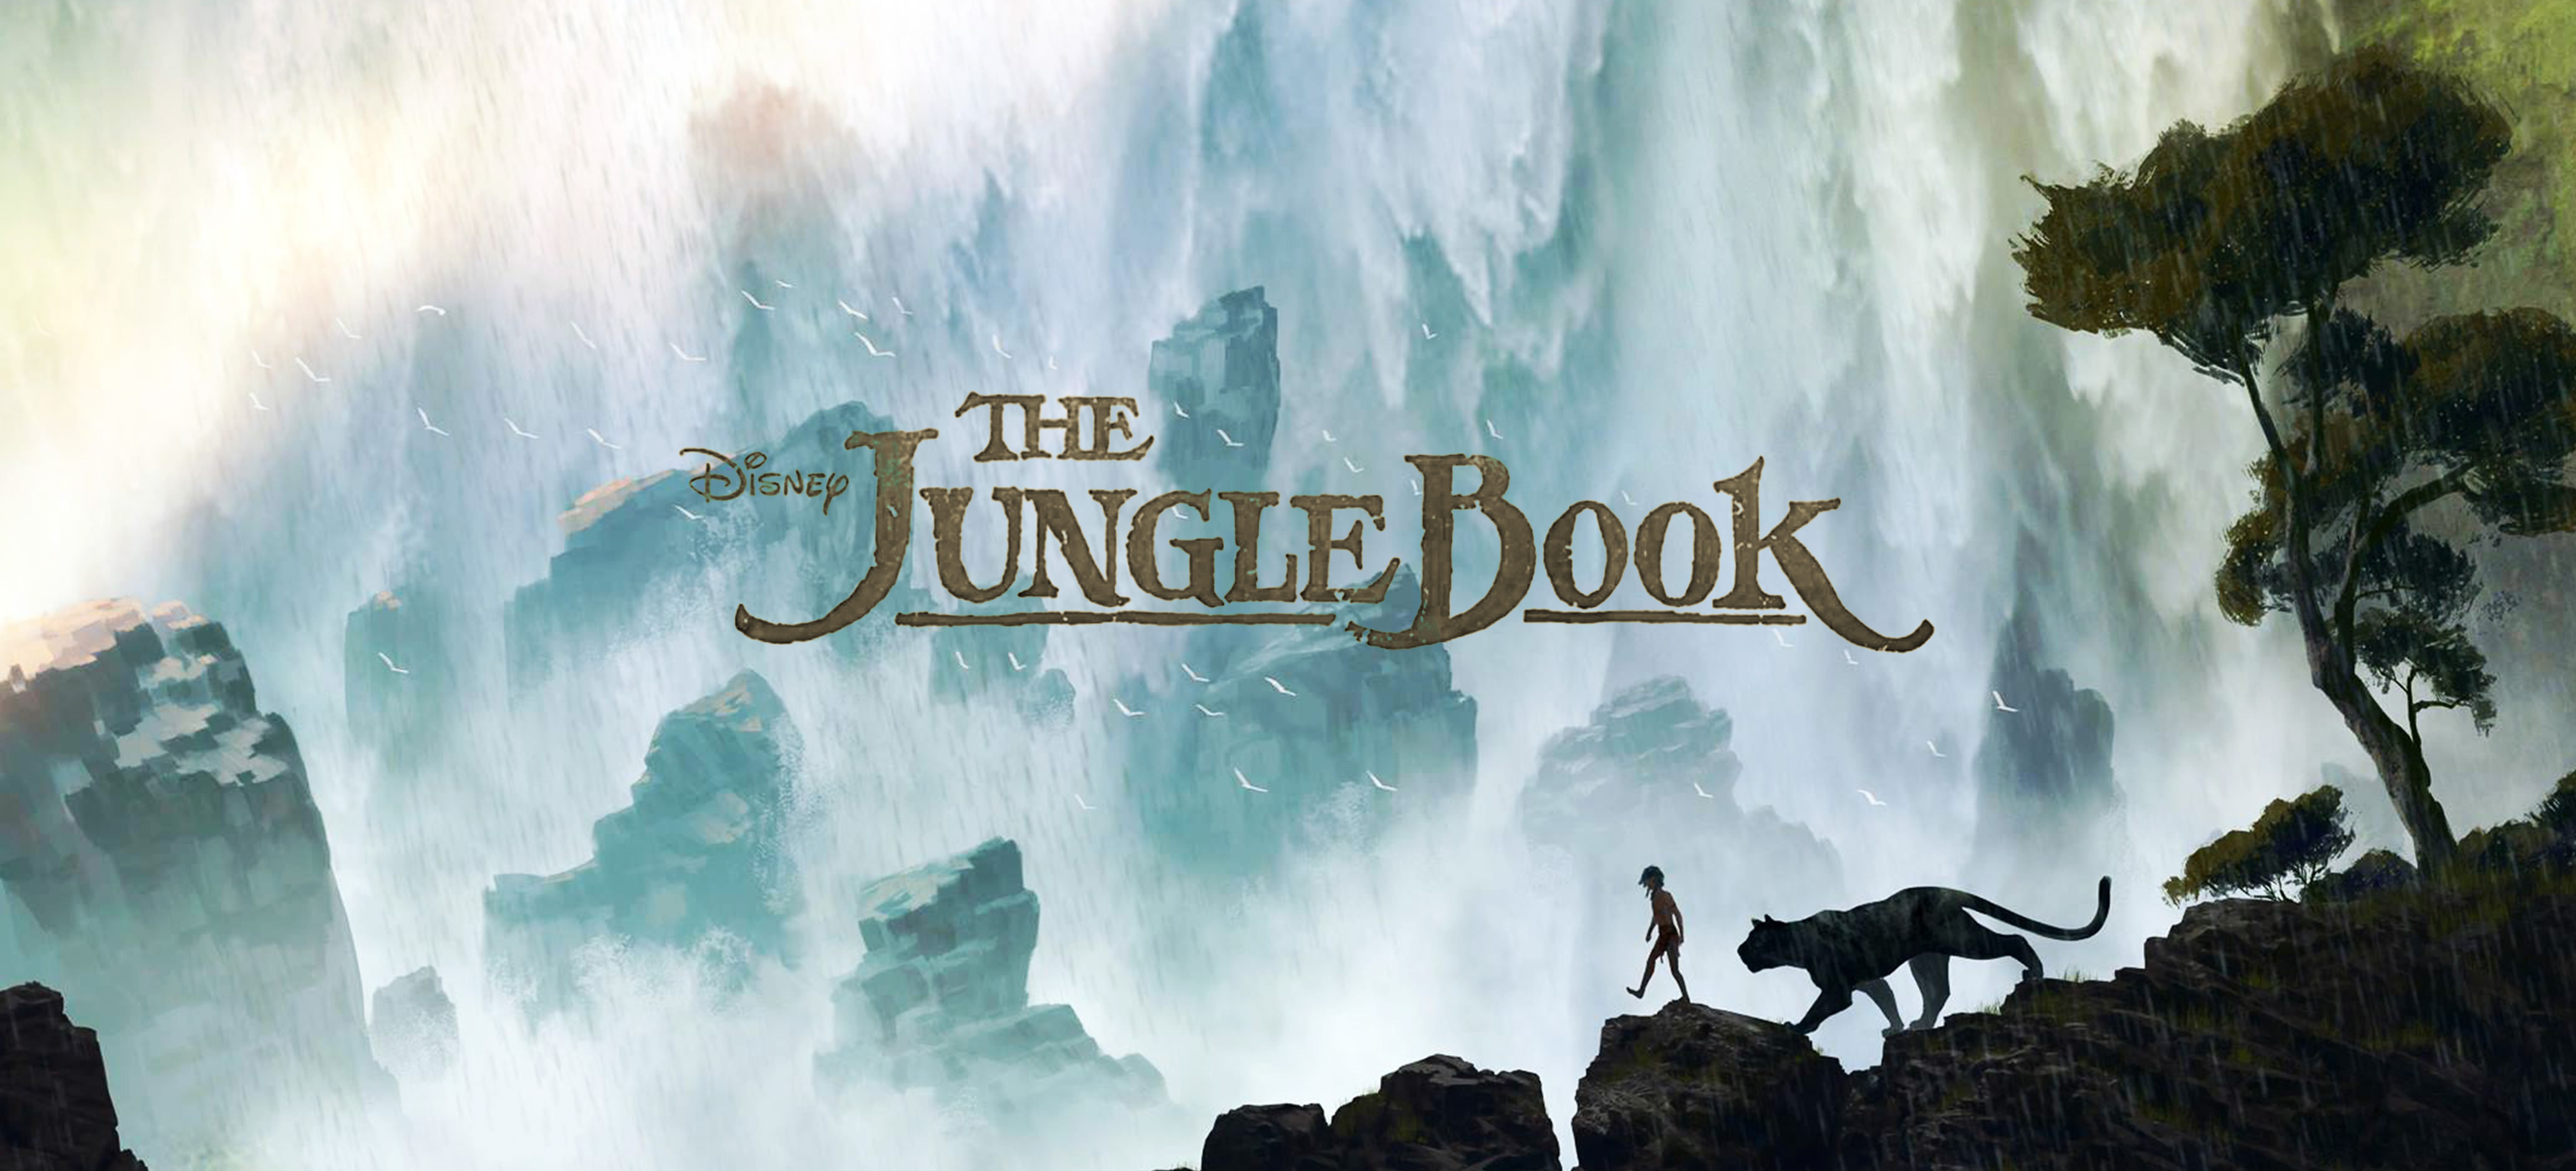 the jungle book review in 200 words